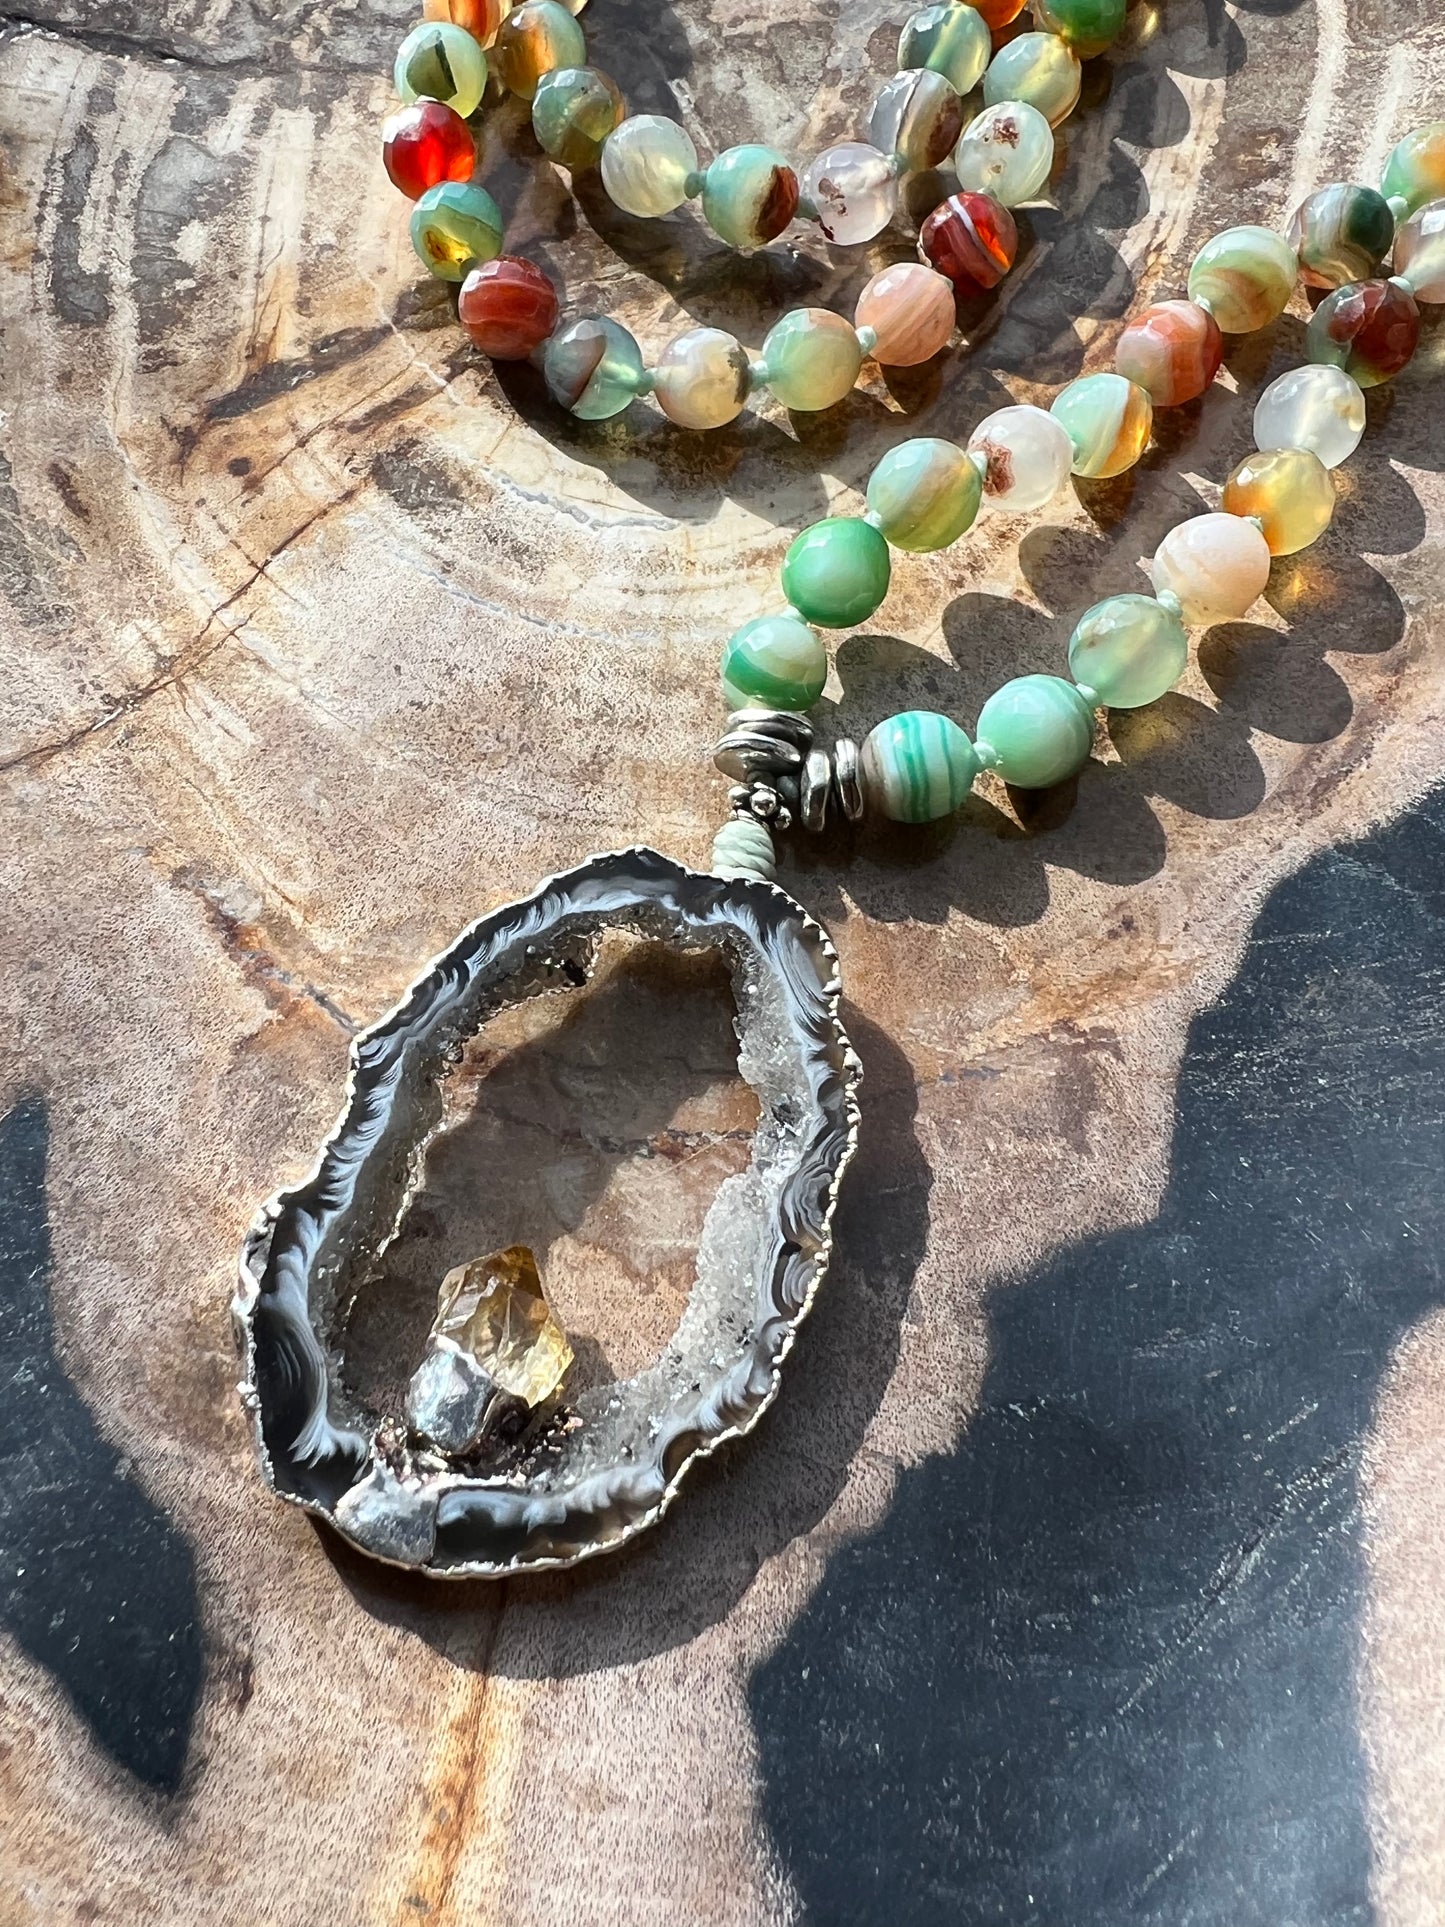 Mālā with Green Banded Agate Beads with a Druzy Agate and Citrine Guru Bead